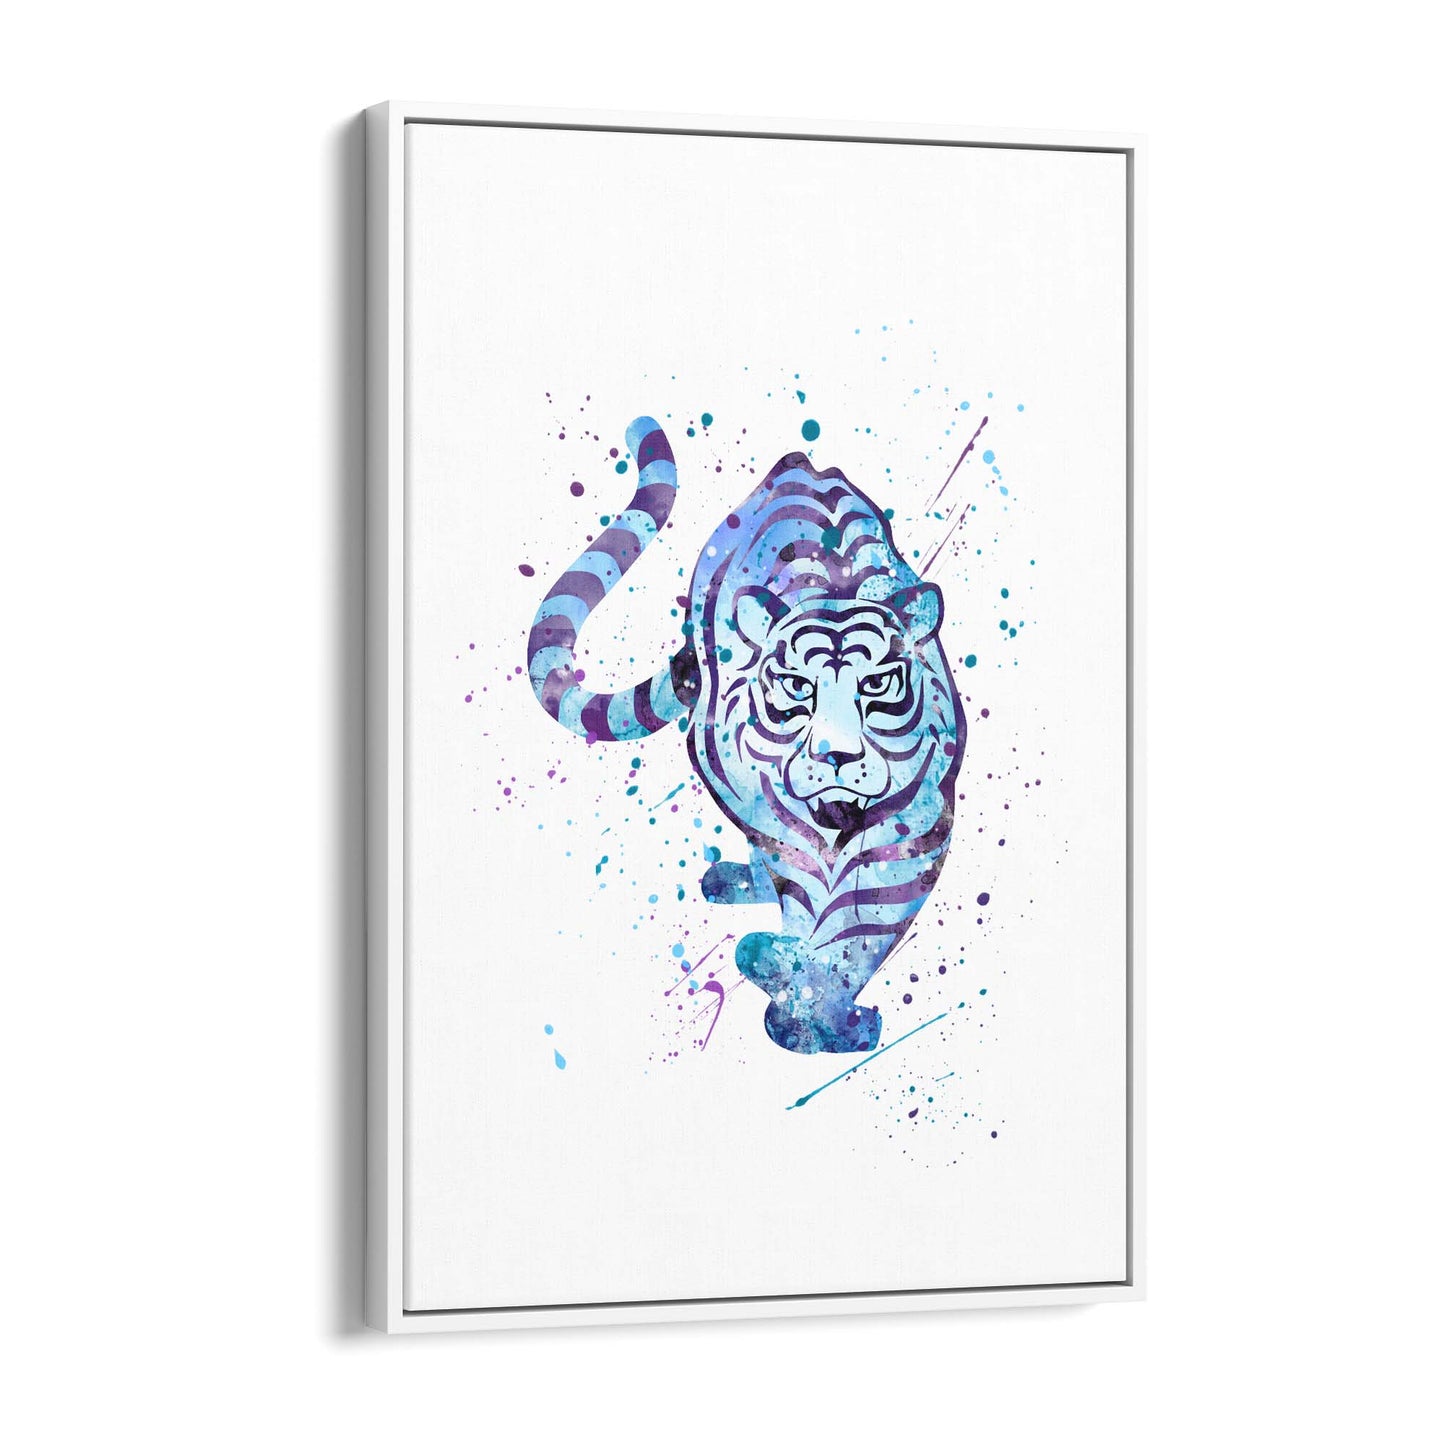 Blue Tiger Cute Animal Painting Wall Art - The Affordable Art Company